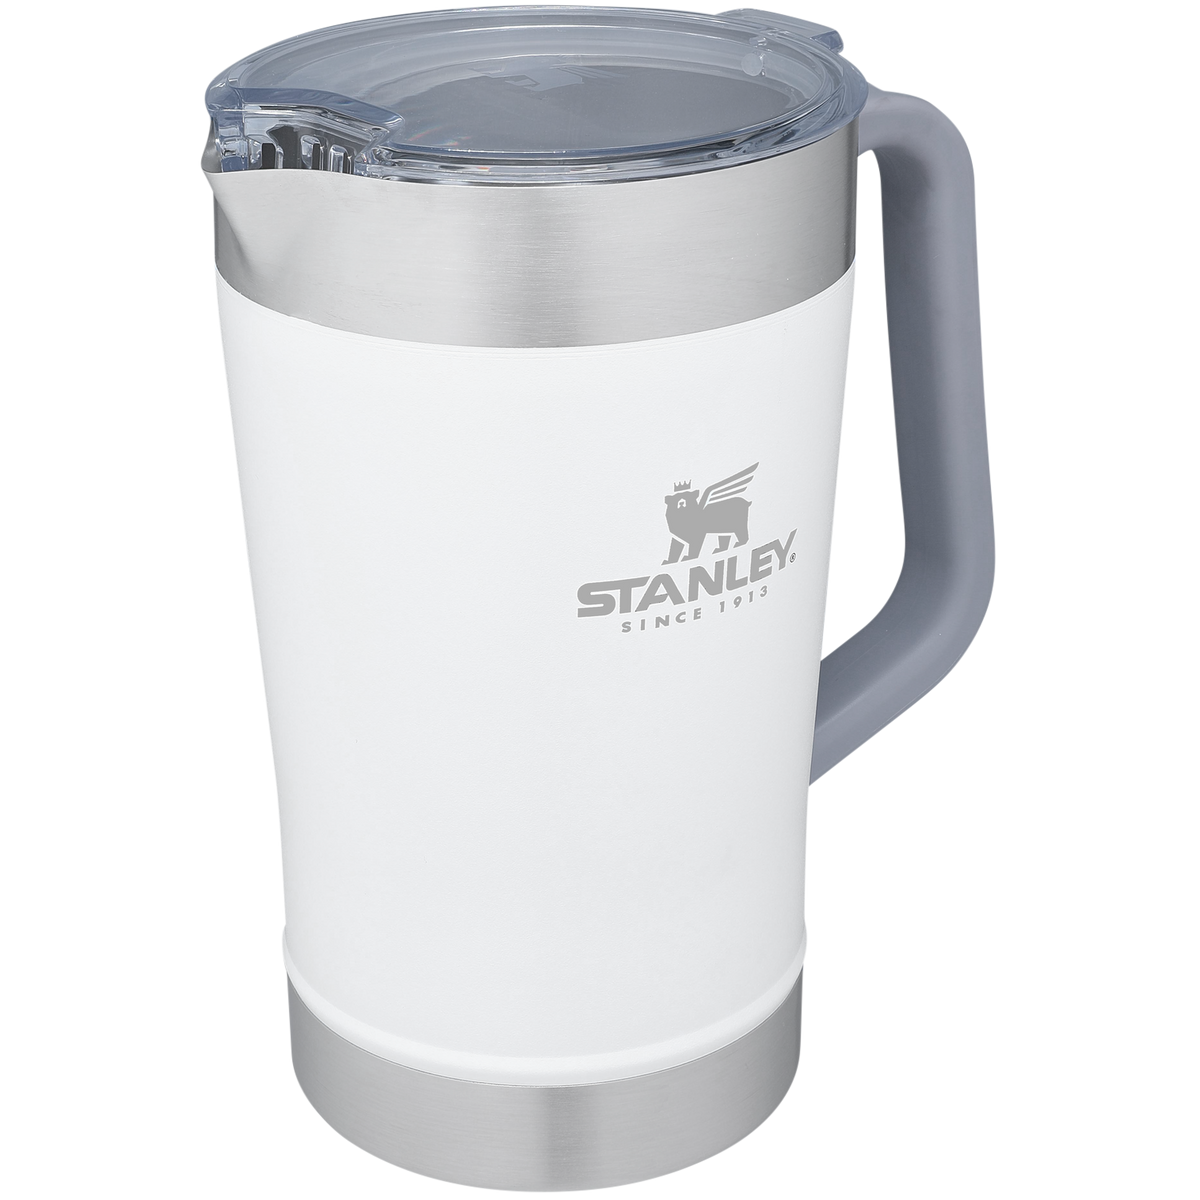 Classic Stay Chill Beer Pitcher | 64 OZ | 1.9 L